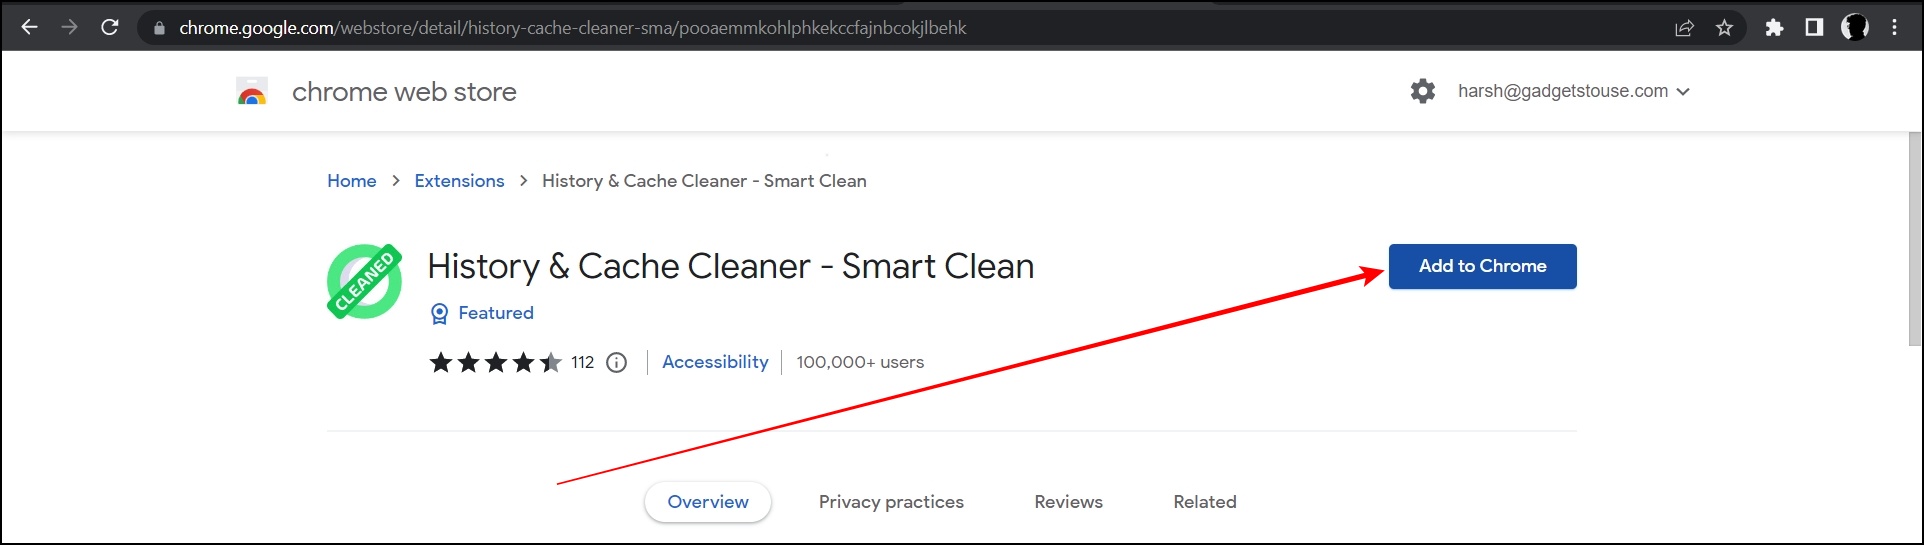 History & Cache Cleaner - Smart Clean Extension